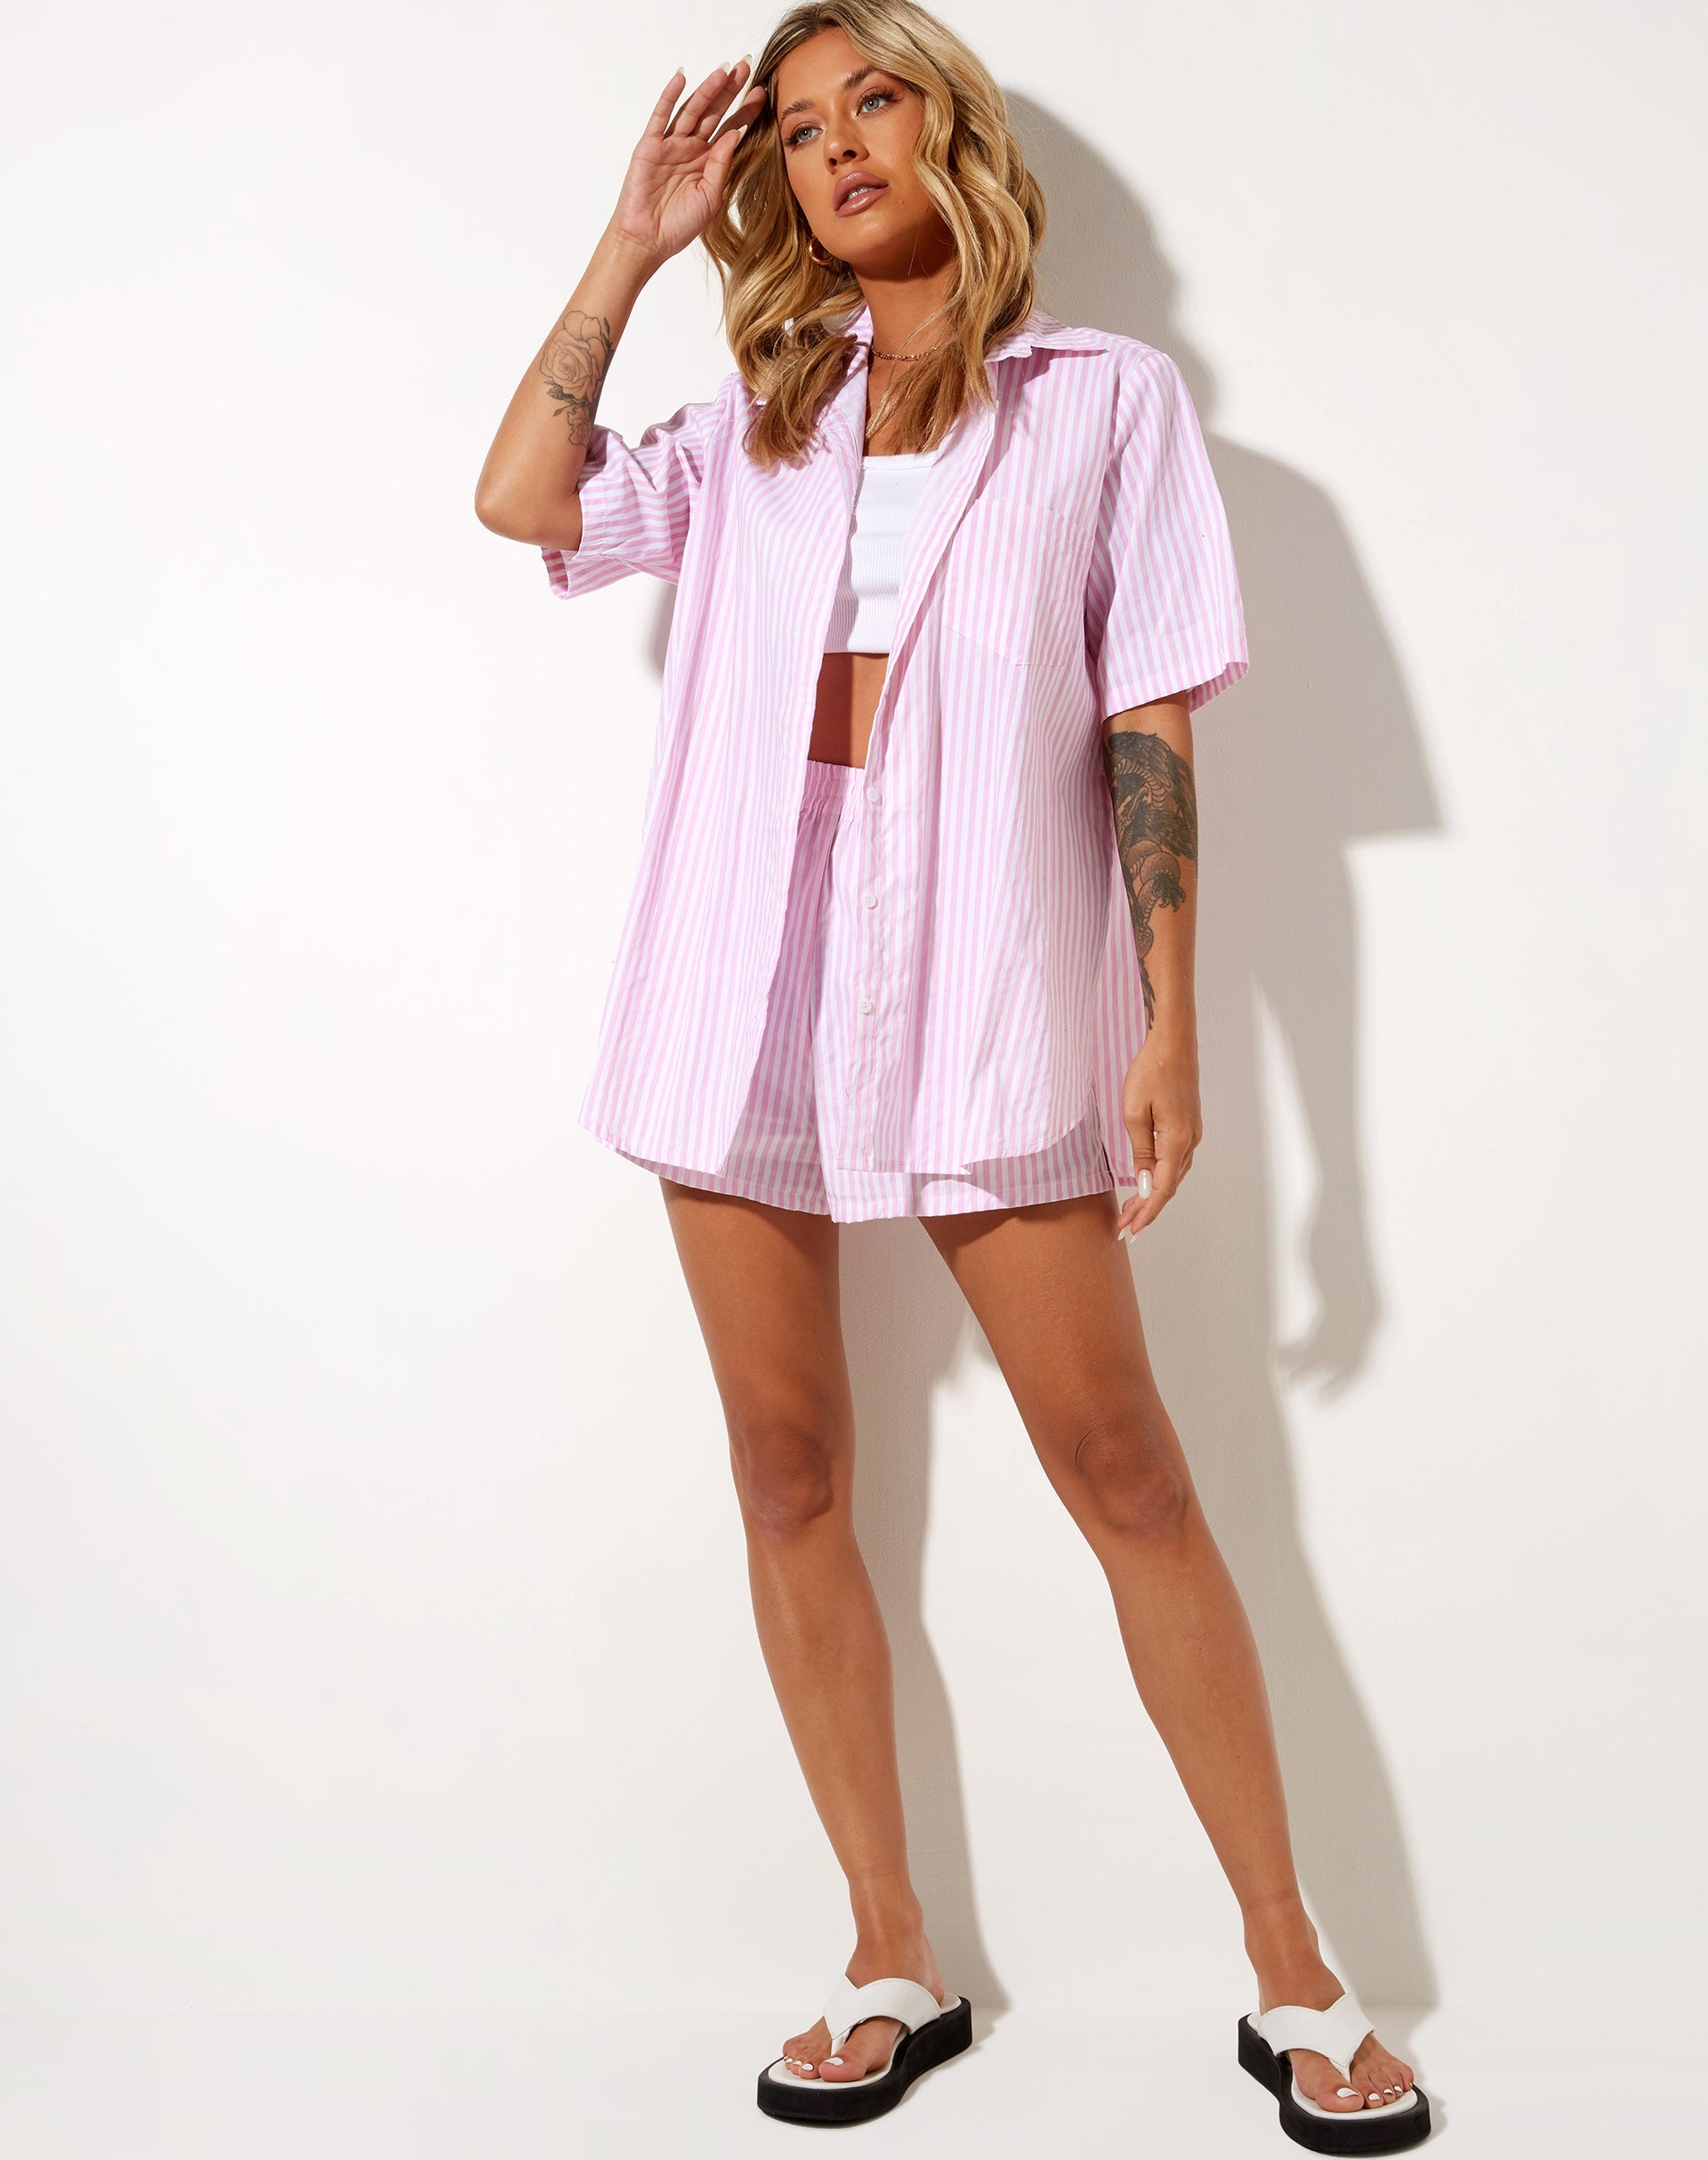 Image of Smith Short Sleeve Shirt in Vertical Stripe Pink and White